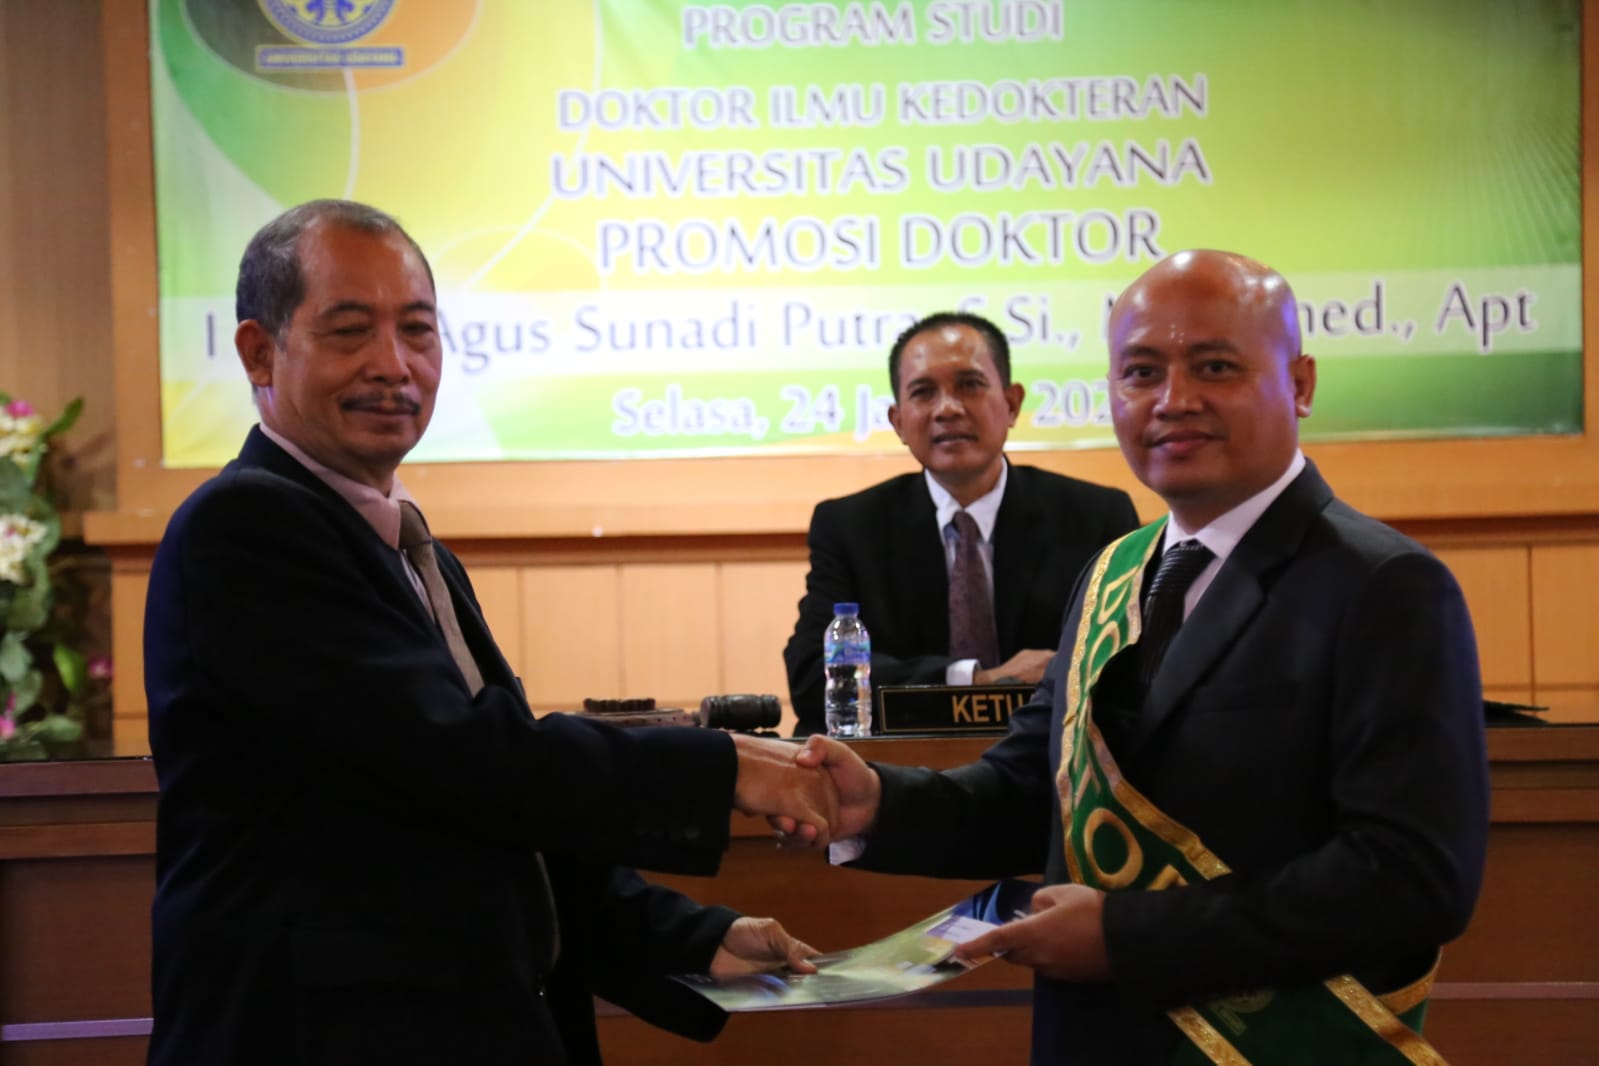 Agus Sunadi Putra earns a Doctor of Medicine degree after discovering the potential of Euphorbia Milii leaves to speed up the healing process of burns.